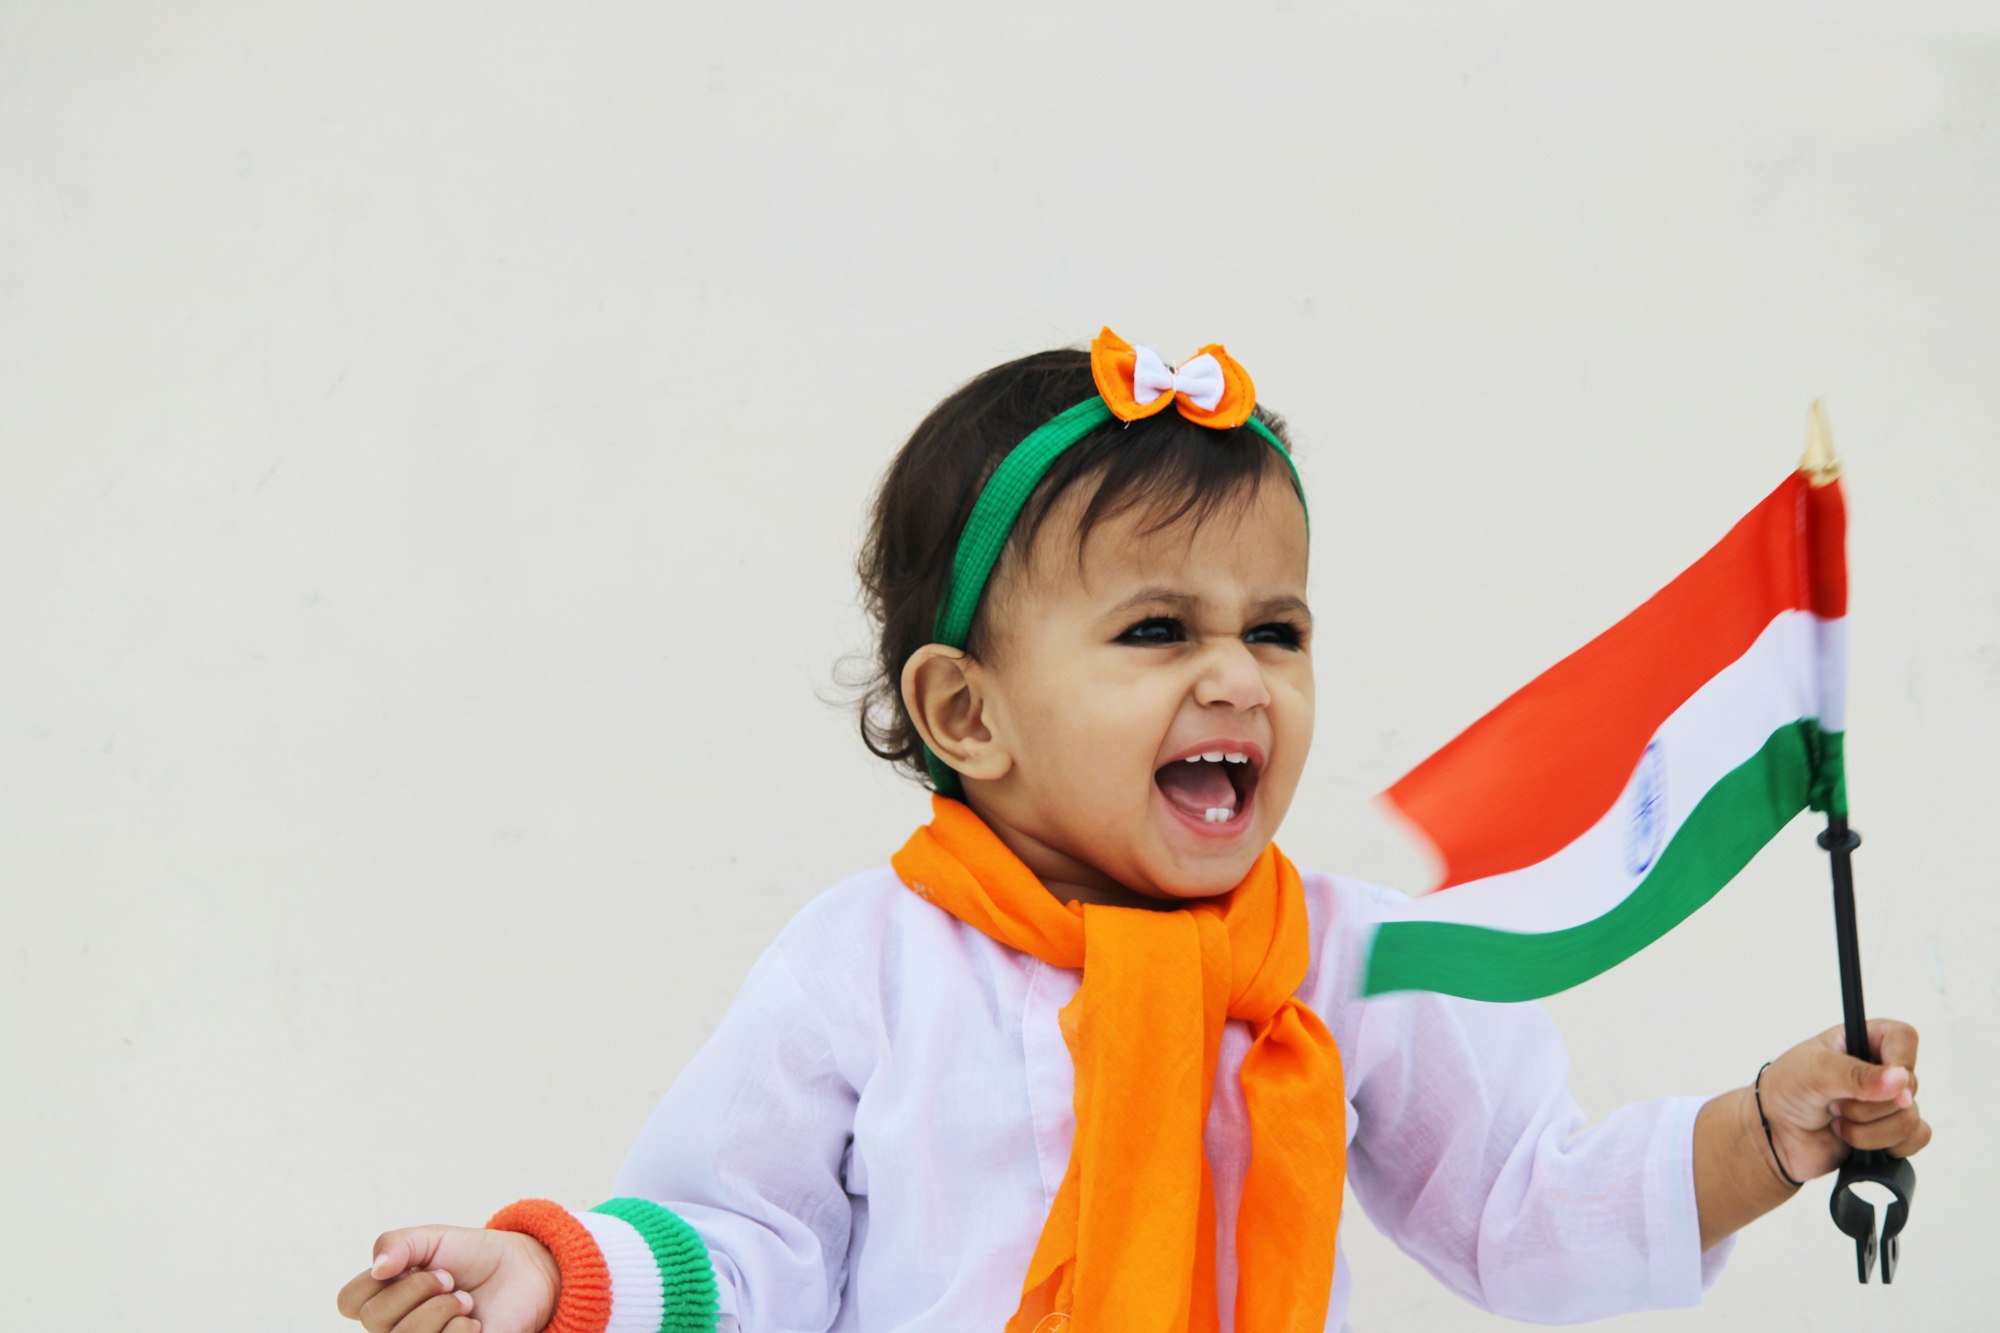 Cute kids kuhu chouhan on the occasion india independence day. jai hind.